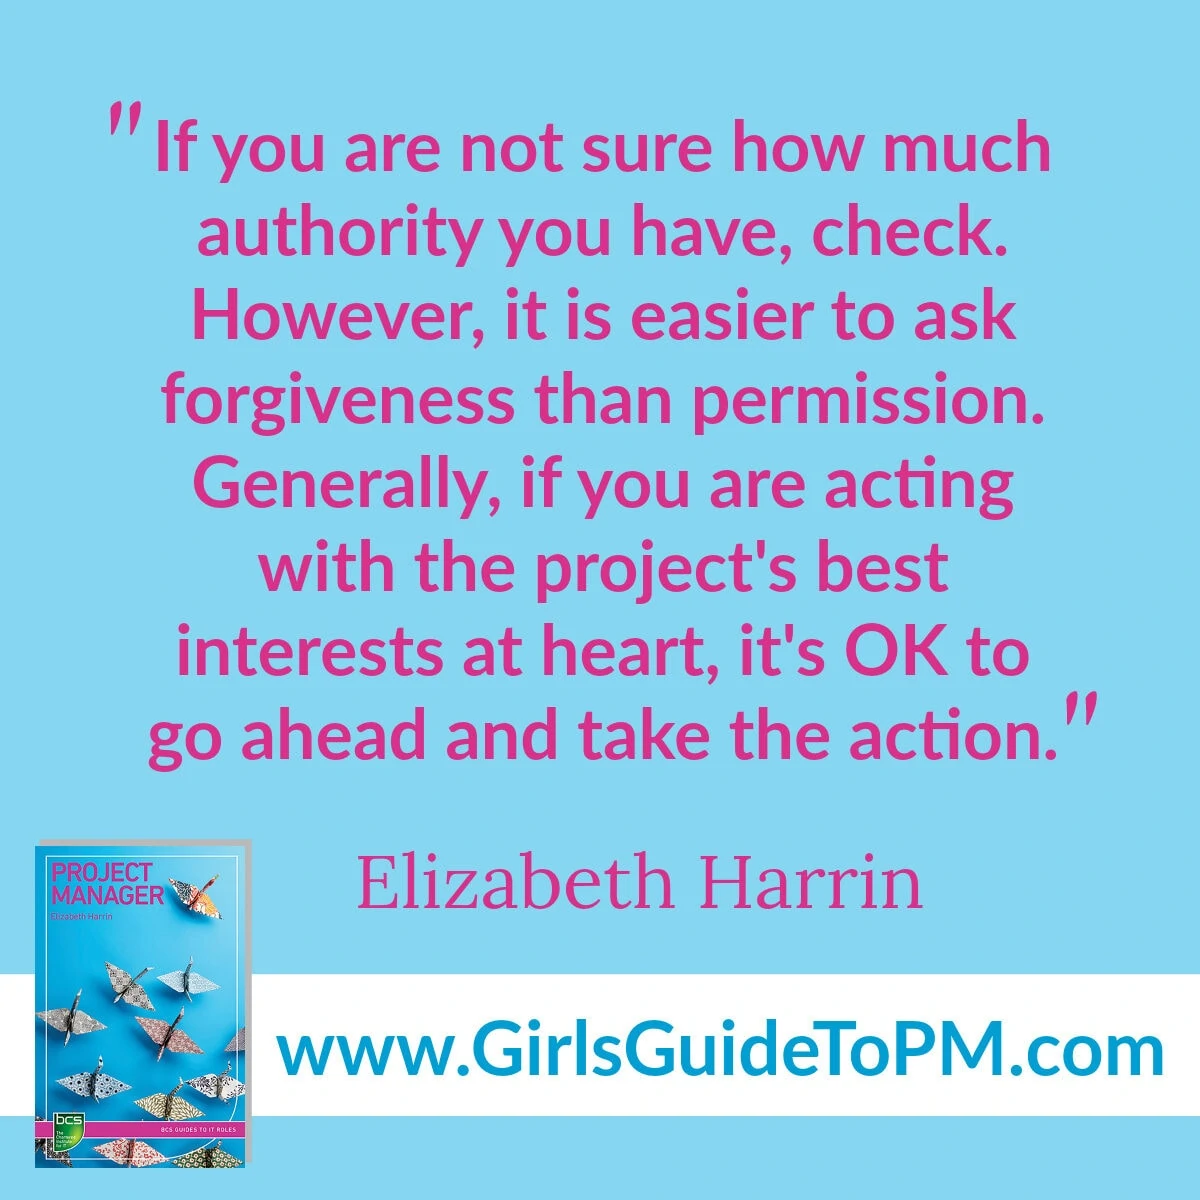 If you are not sure how much authority you have, check. However, it is easier to ask forgiveness than permission. Generally, if you are acting with the project's best interests at heart, it's OK to go ahead and take the action.